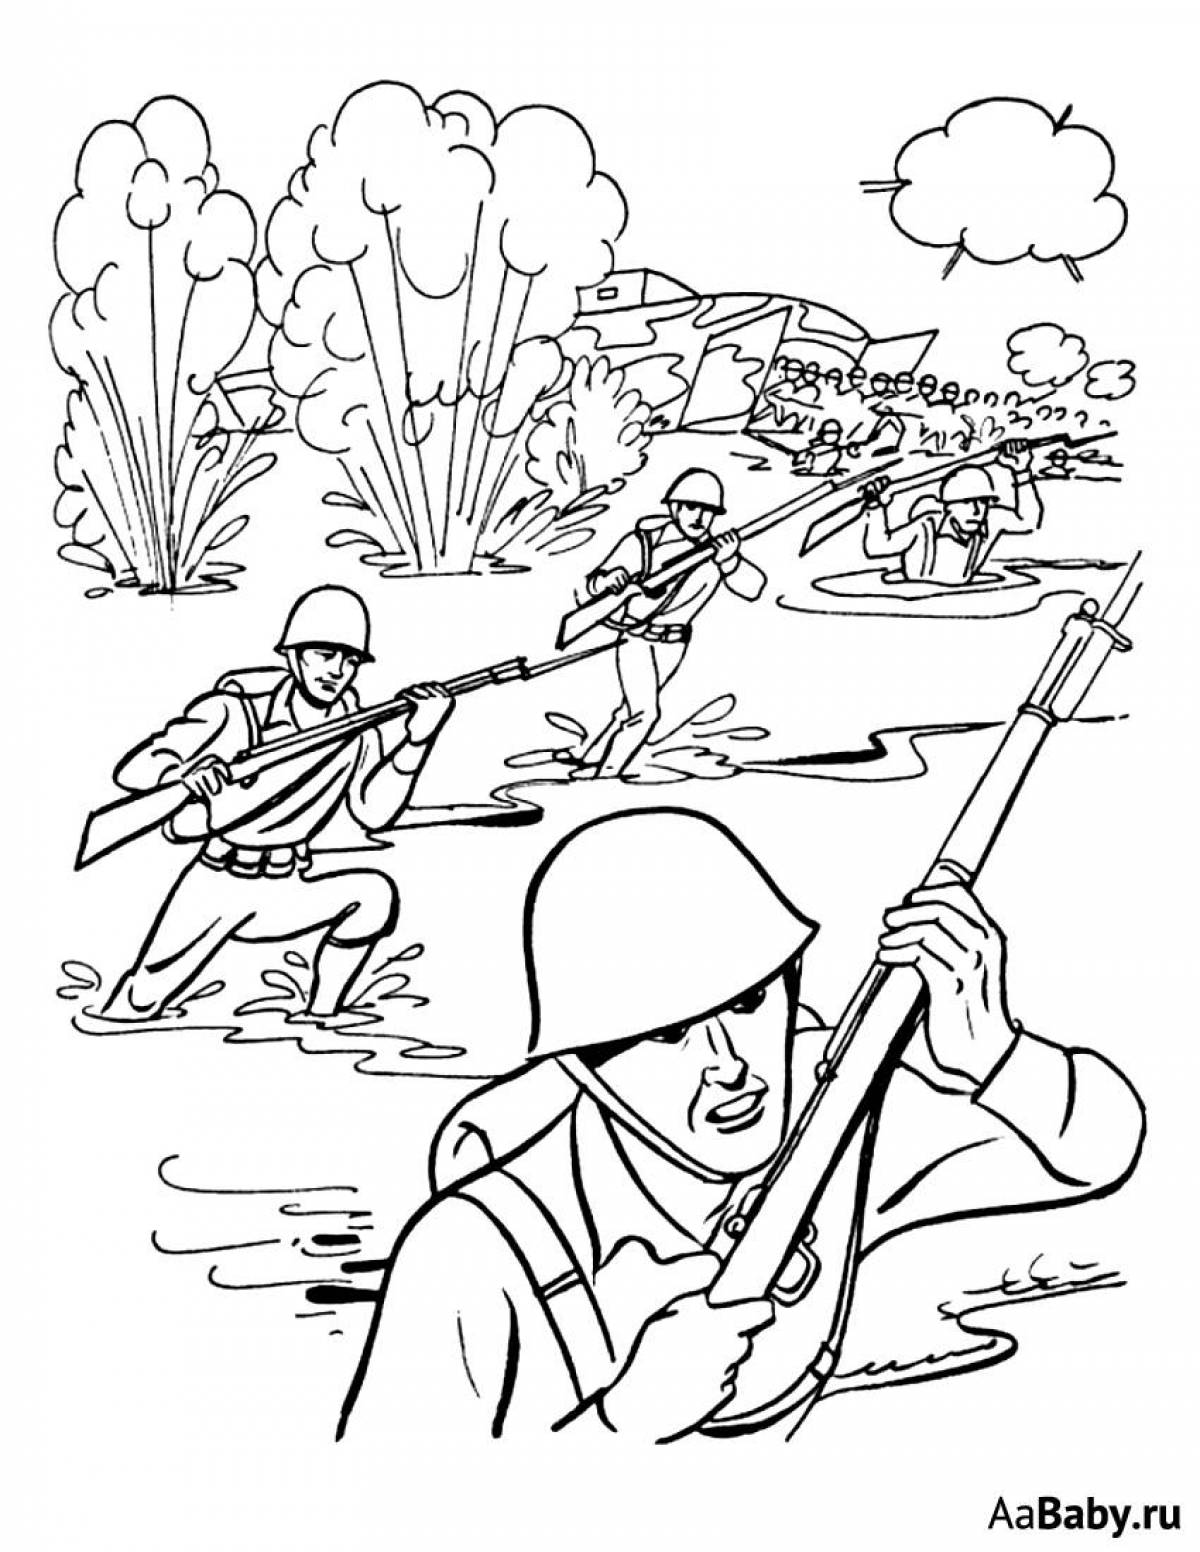 Coloring book exciting stalingrad